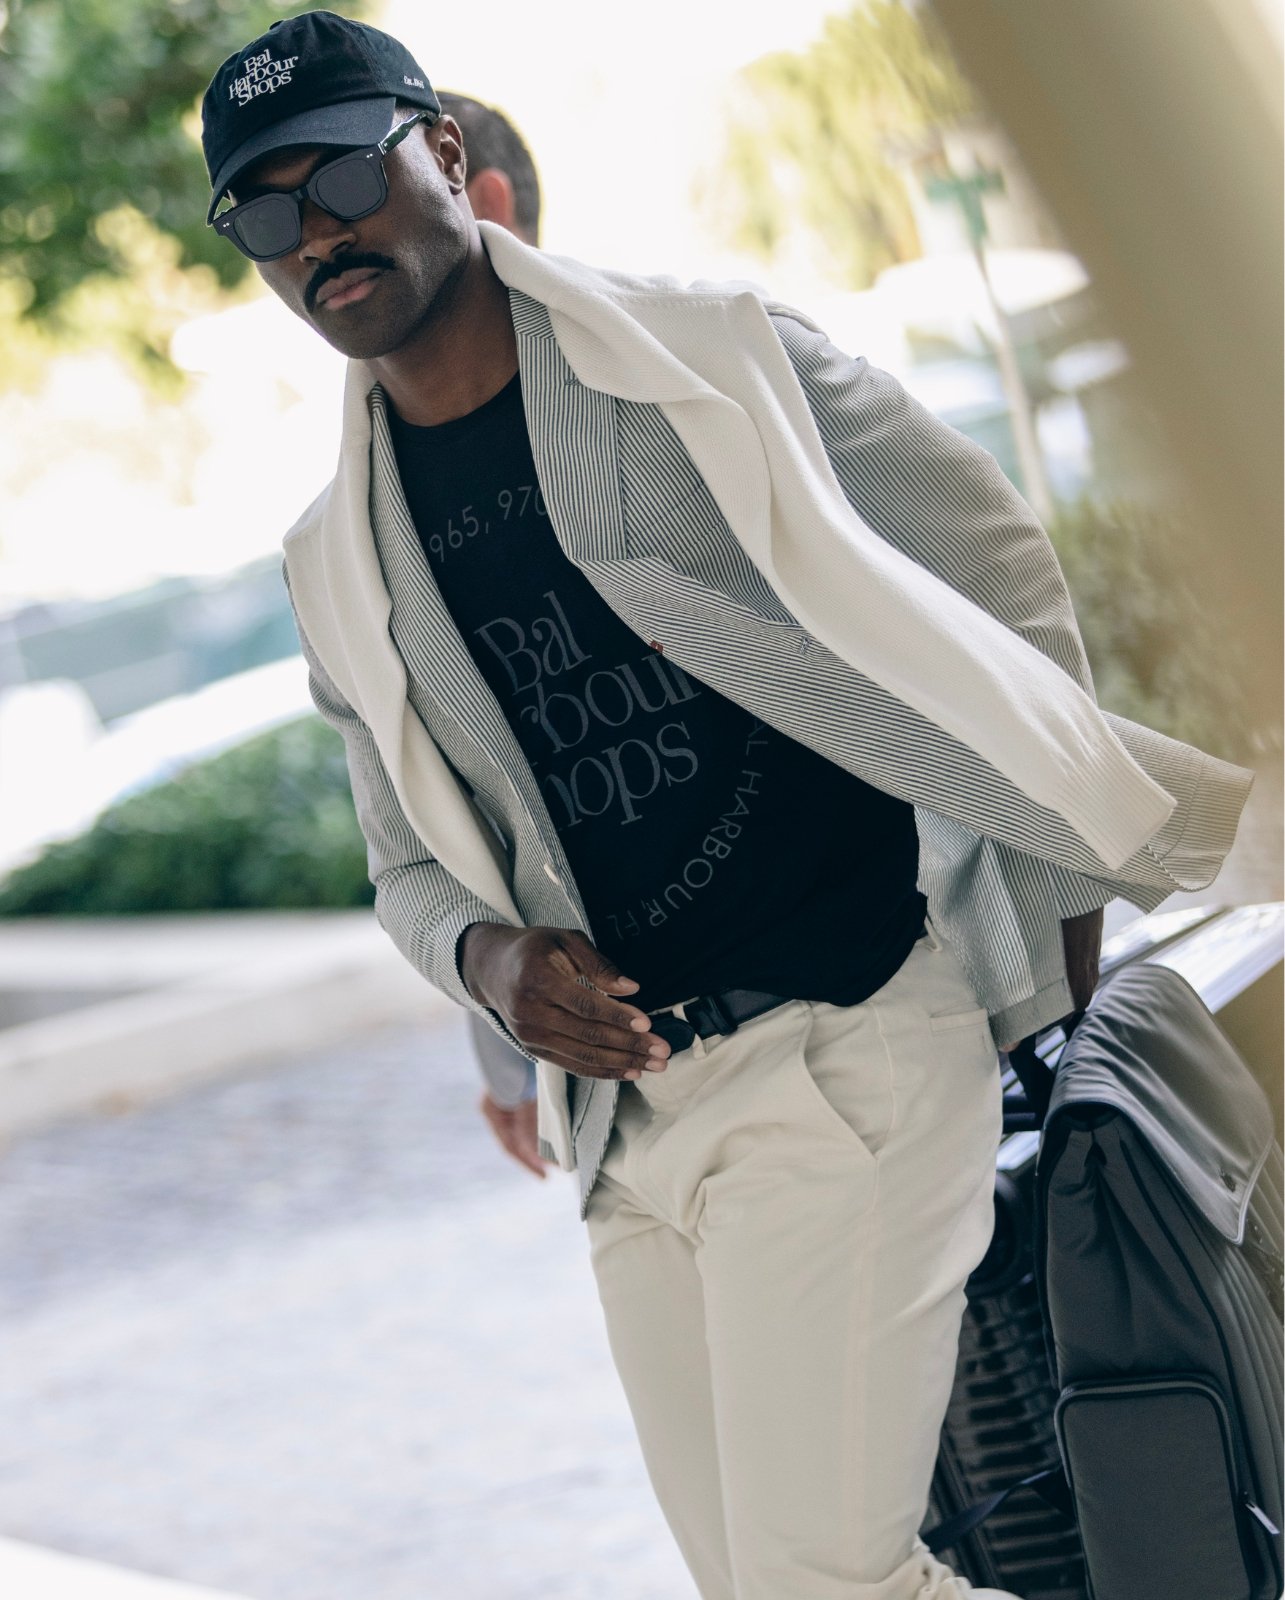 Lifestyle shot of male model styled in the black Bal Harbour Shops 1965 hat and t-shirt with brand logo